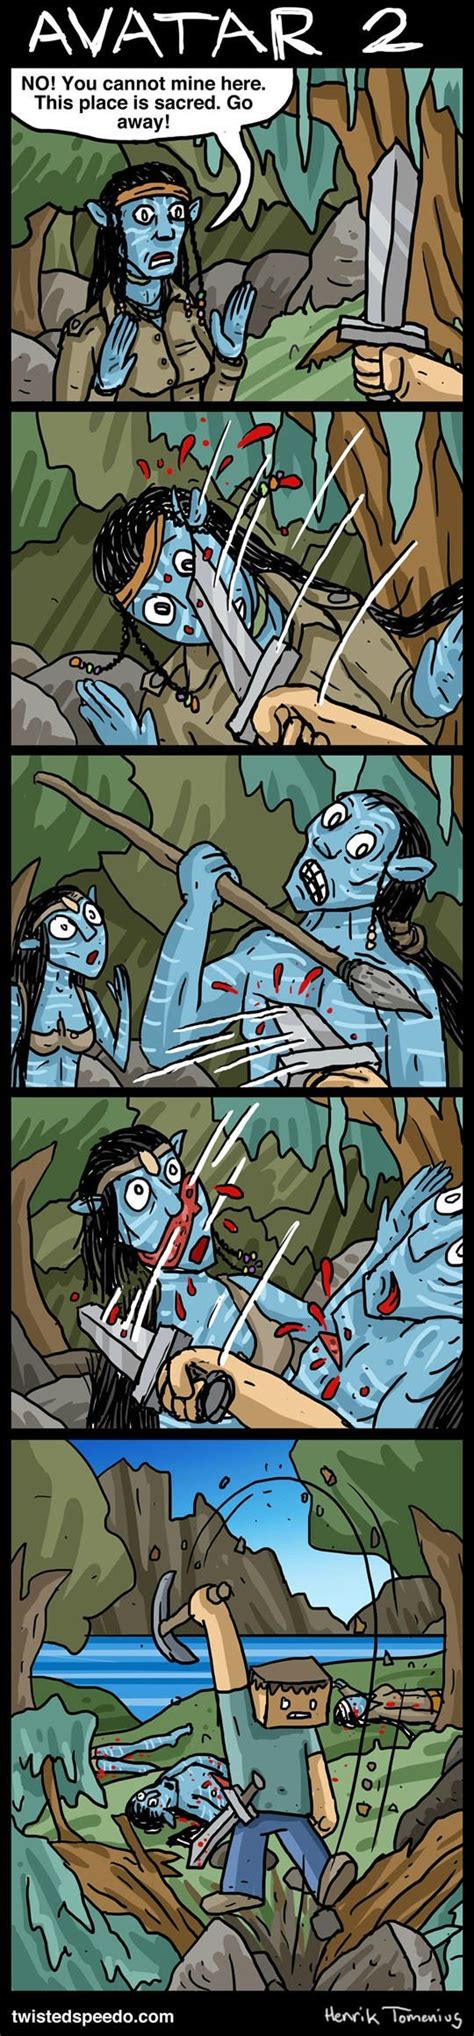 Avatar Movie Pictures And Jokes Funny Pictures And Best